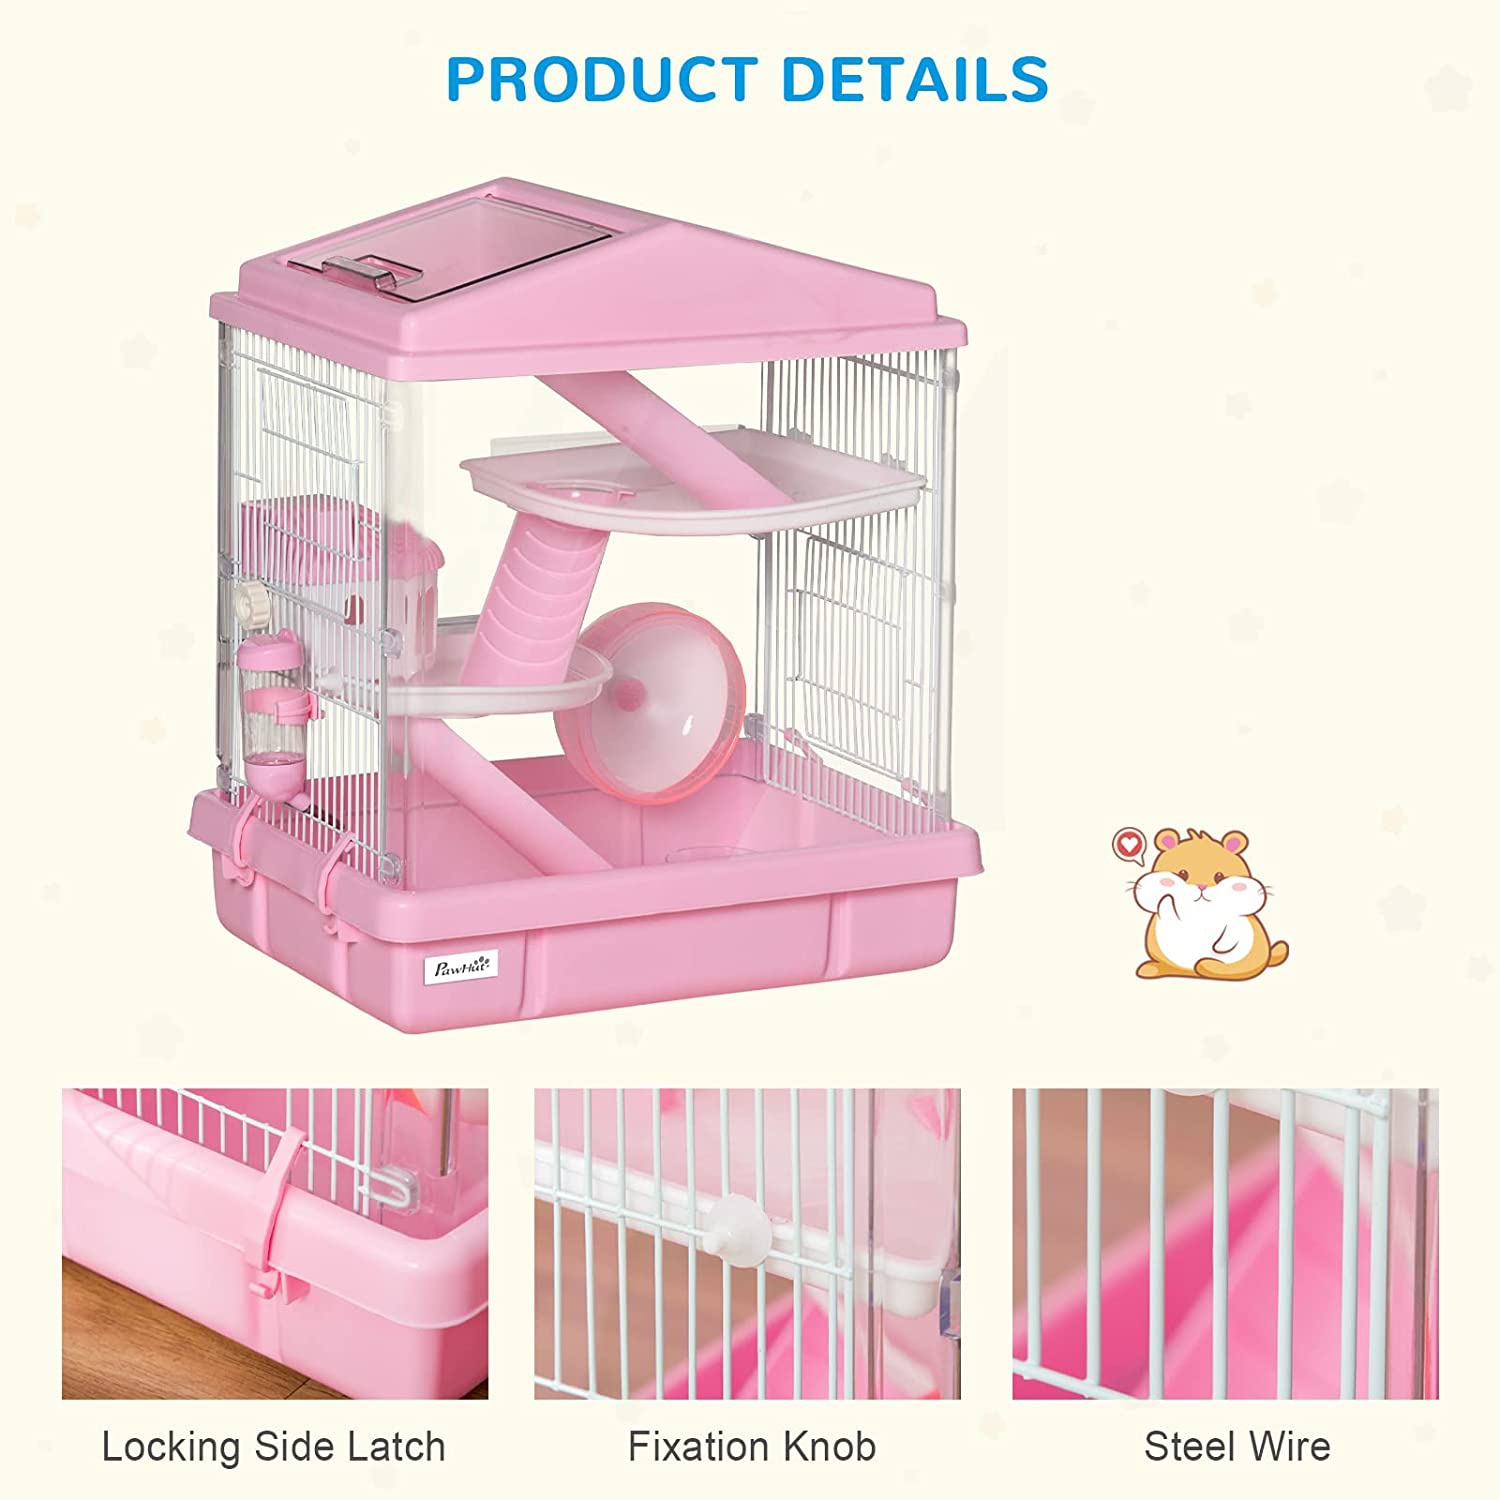 Pawhut Multi-Tier Hamster Cage, Animal Enclosure Starter Kit for Small Pets, Ventilated Steel Wire and Plastic with Exercise Wheel, Food Dish, Water Bottle, Pink